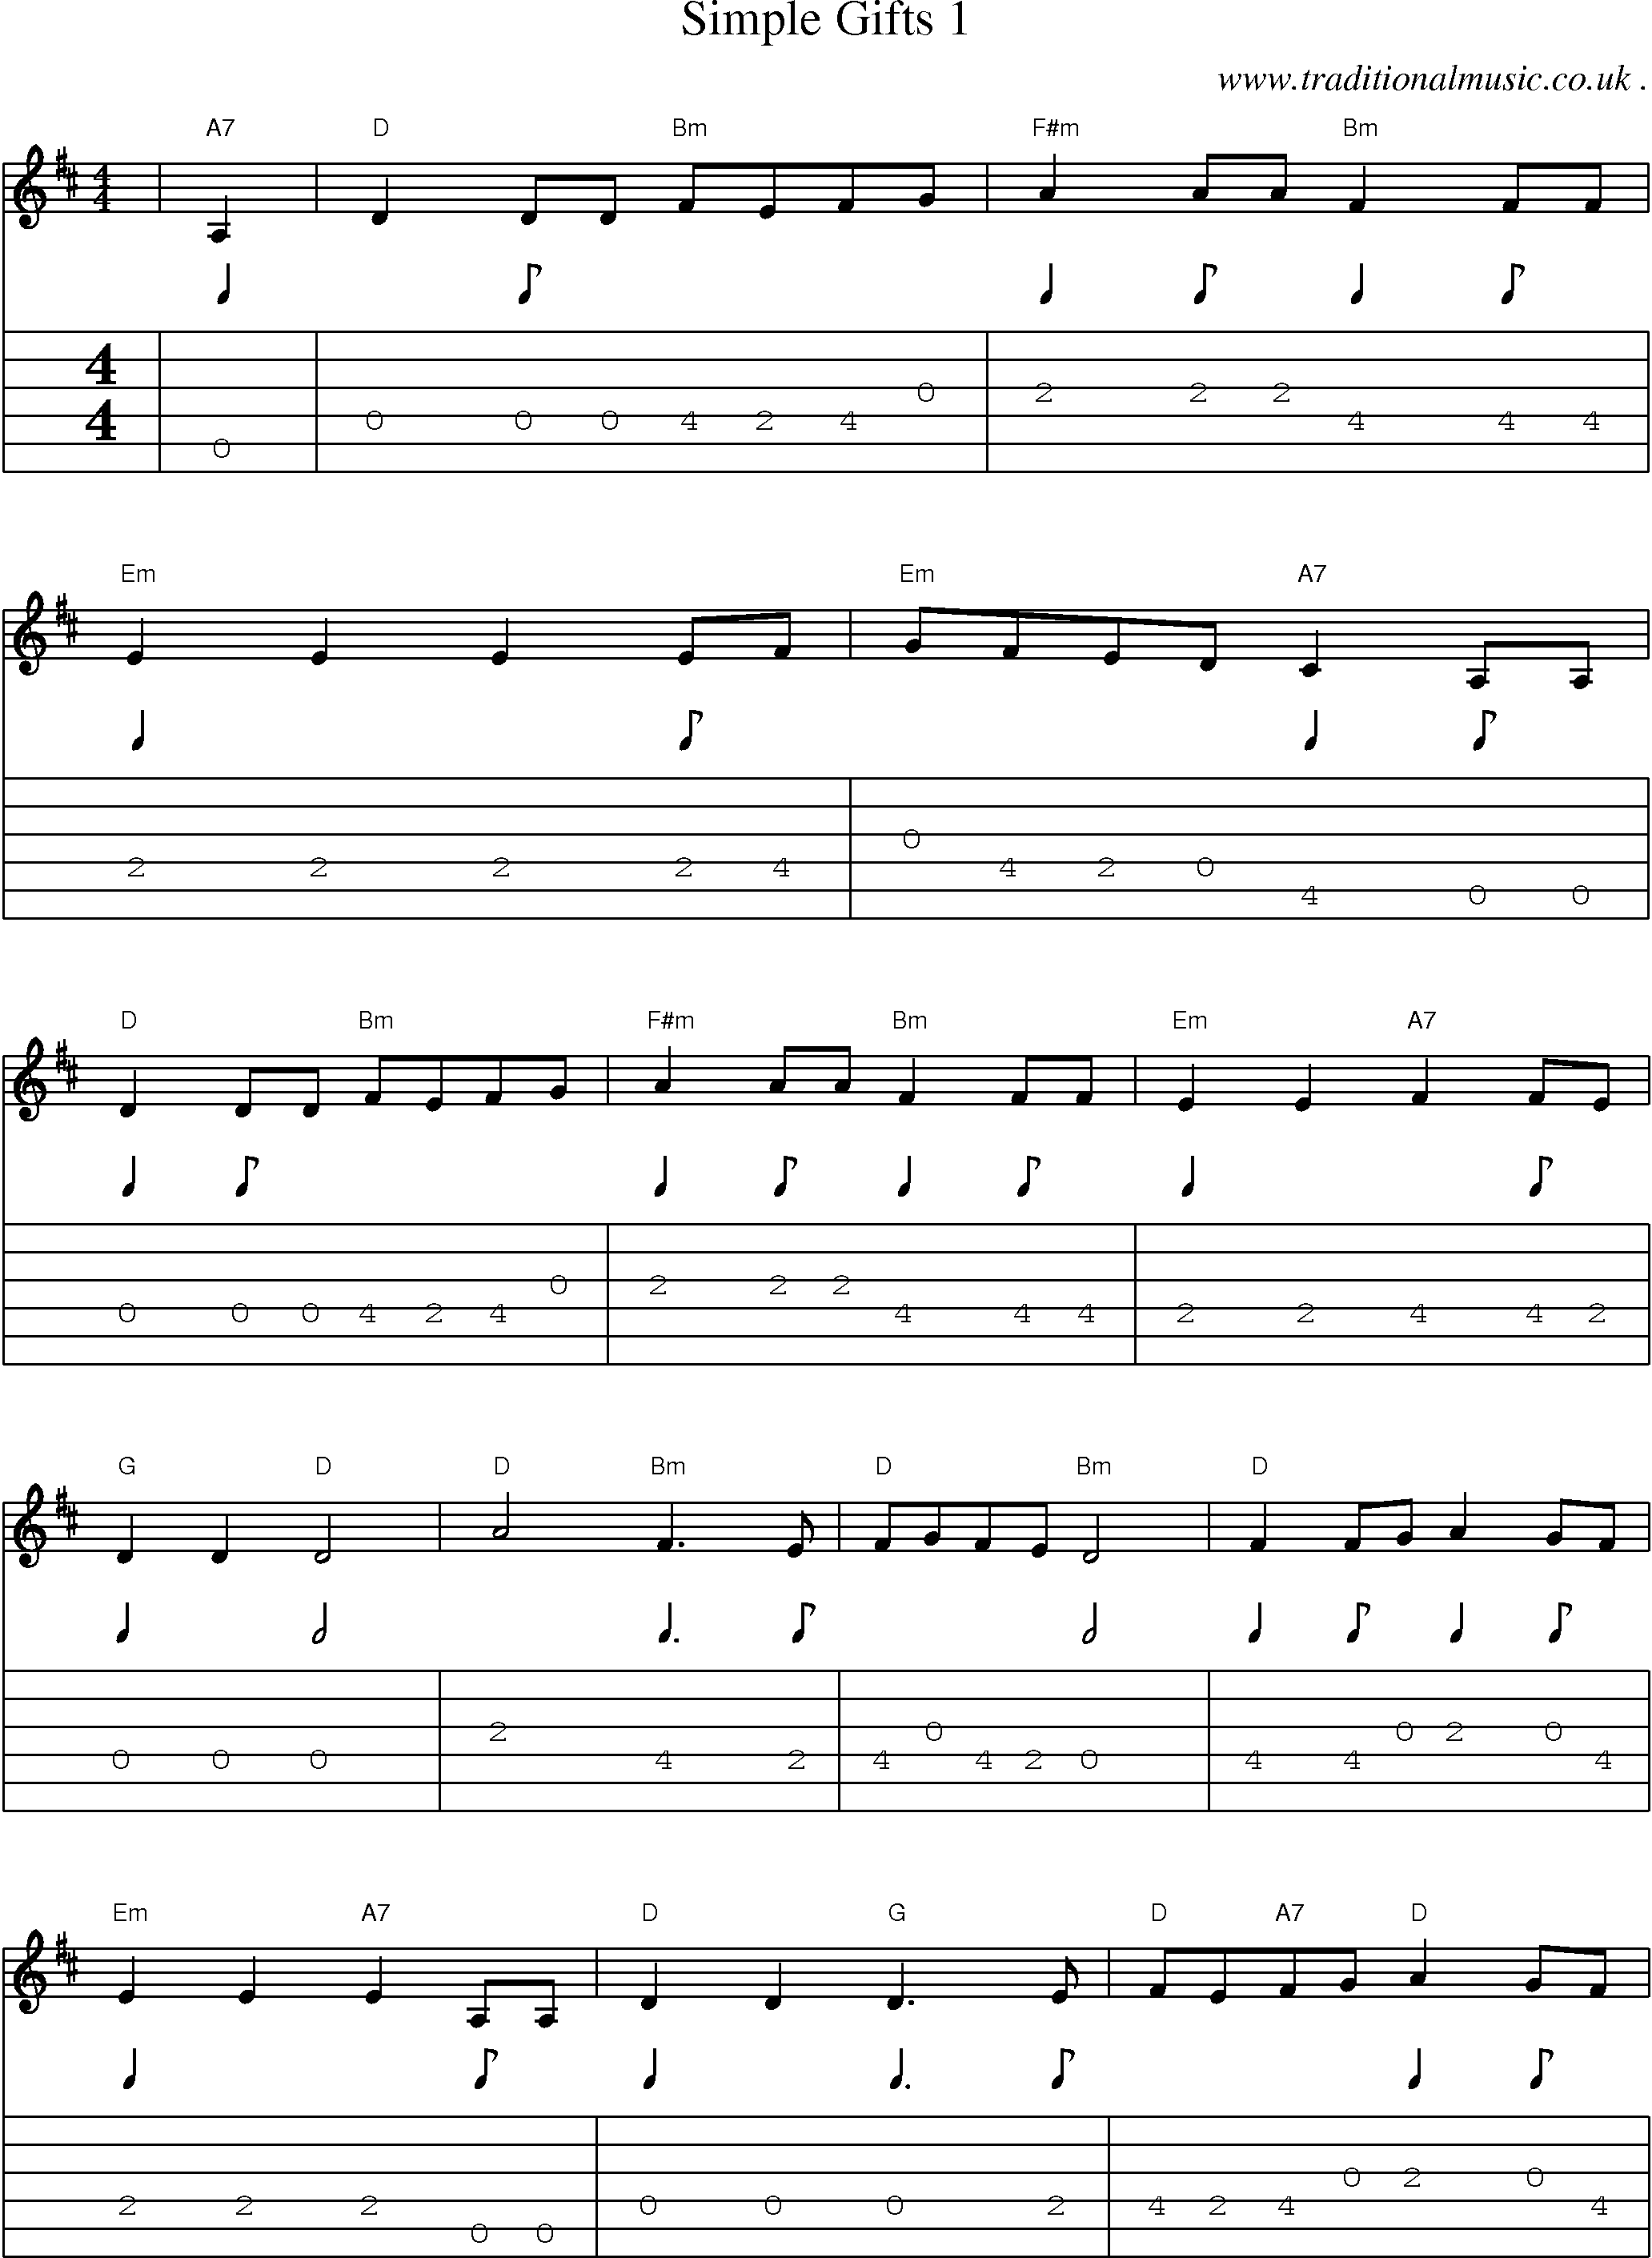 https://www.traditionalmusic.co.uk/american-guitar-tab/png/simple_gifts_1.png